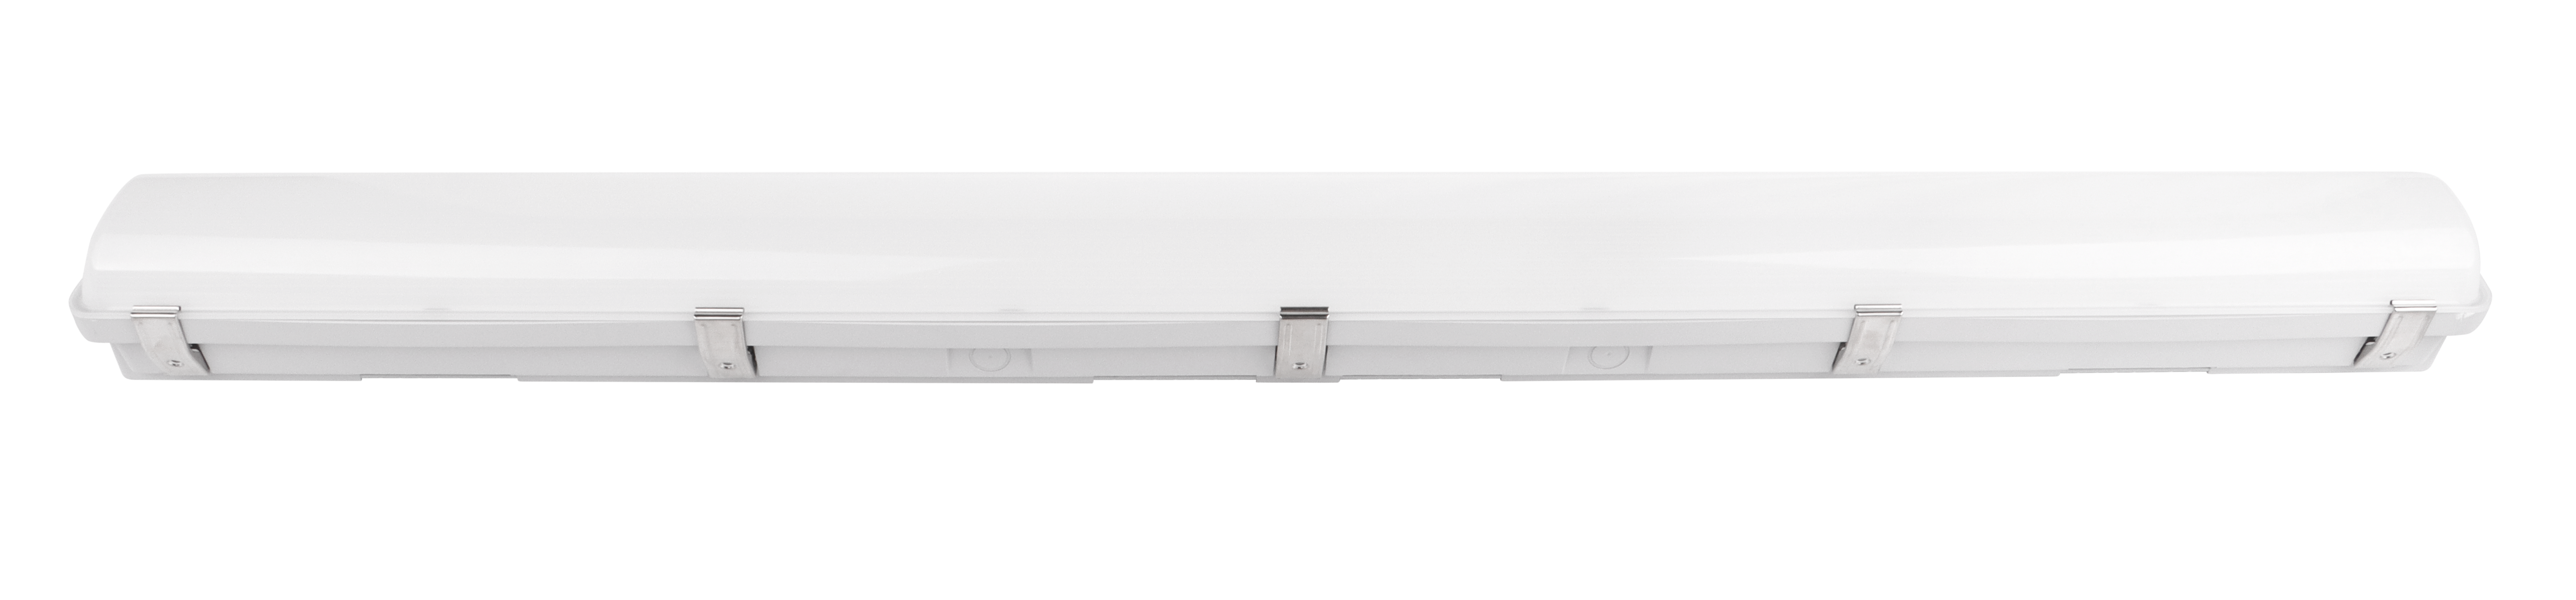 4ft LED Vapor Tight Light - Selectable Wattage(50W/40W/30W) & CCT(3000K/4000K/5000K), 130lm/w, 0-10V Dimmable, DLC 5.1 Certified - Eco LED Lightings 